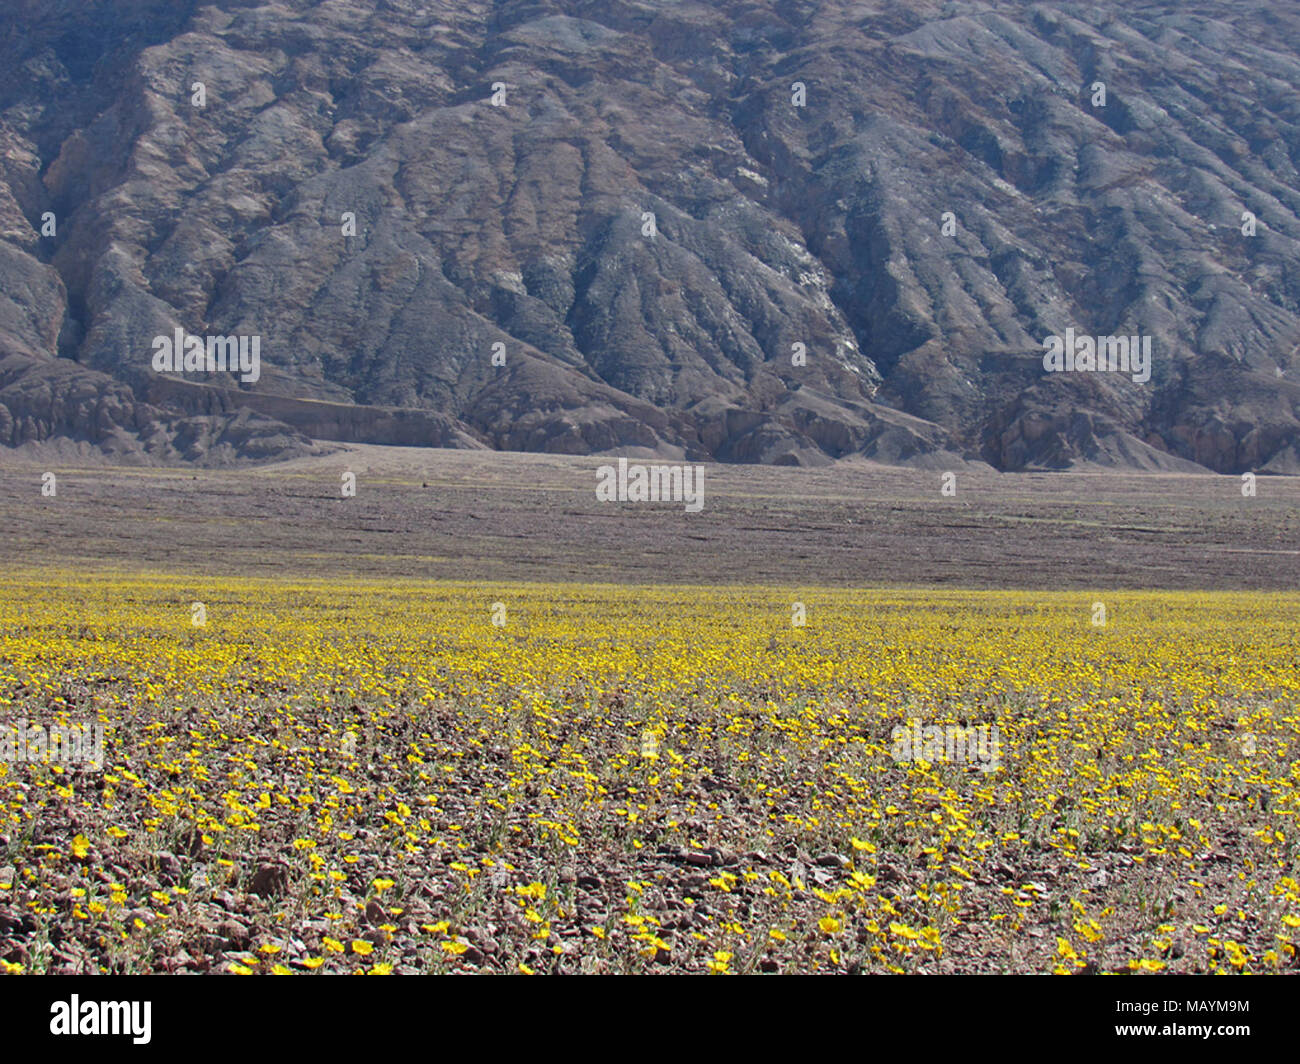 Super Bloom of Wildflowers at Death Valley NP in California Stock Photo